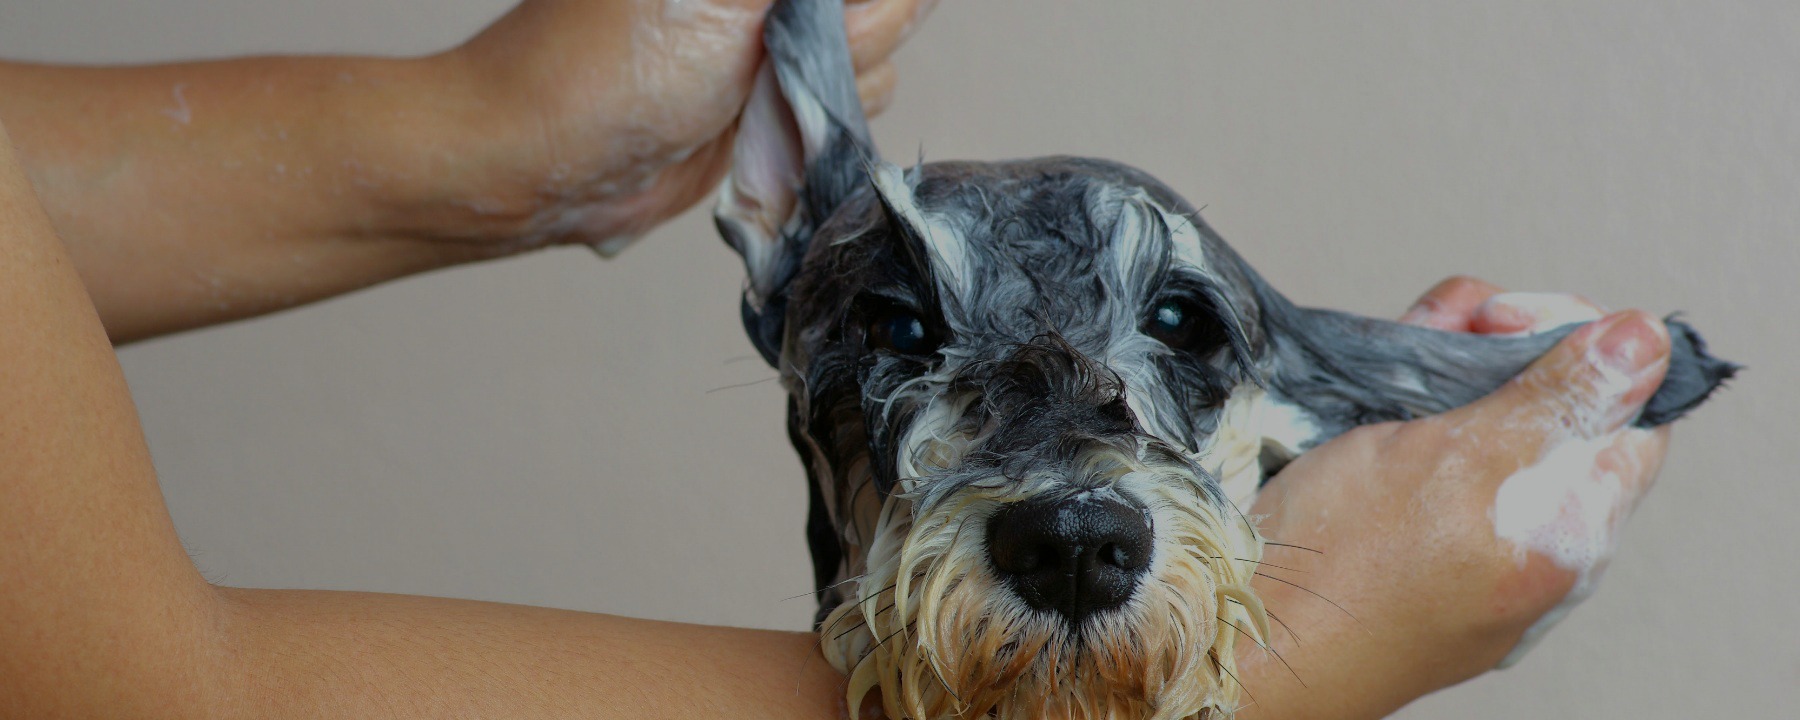 How You’re Tested at an Online Dog Grooming School